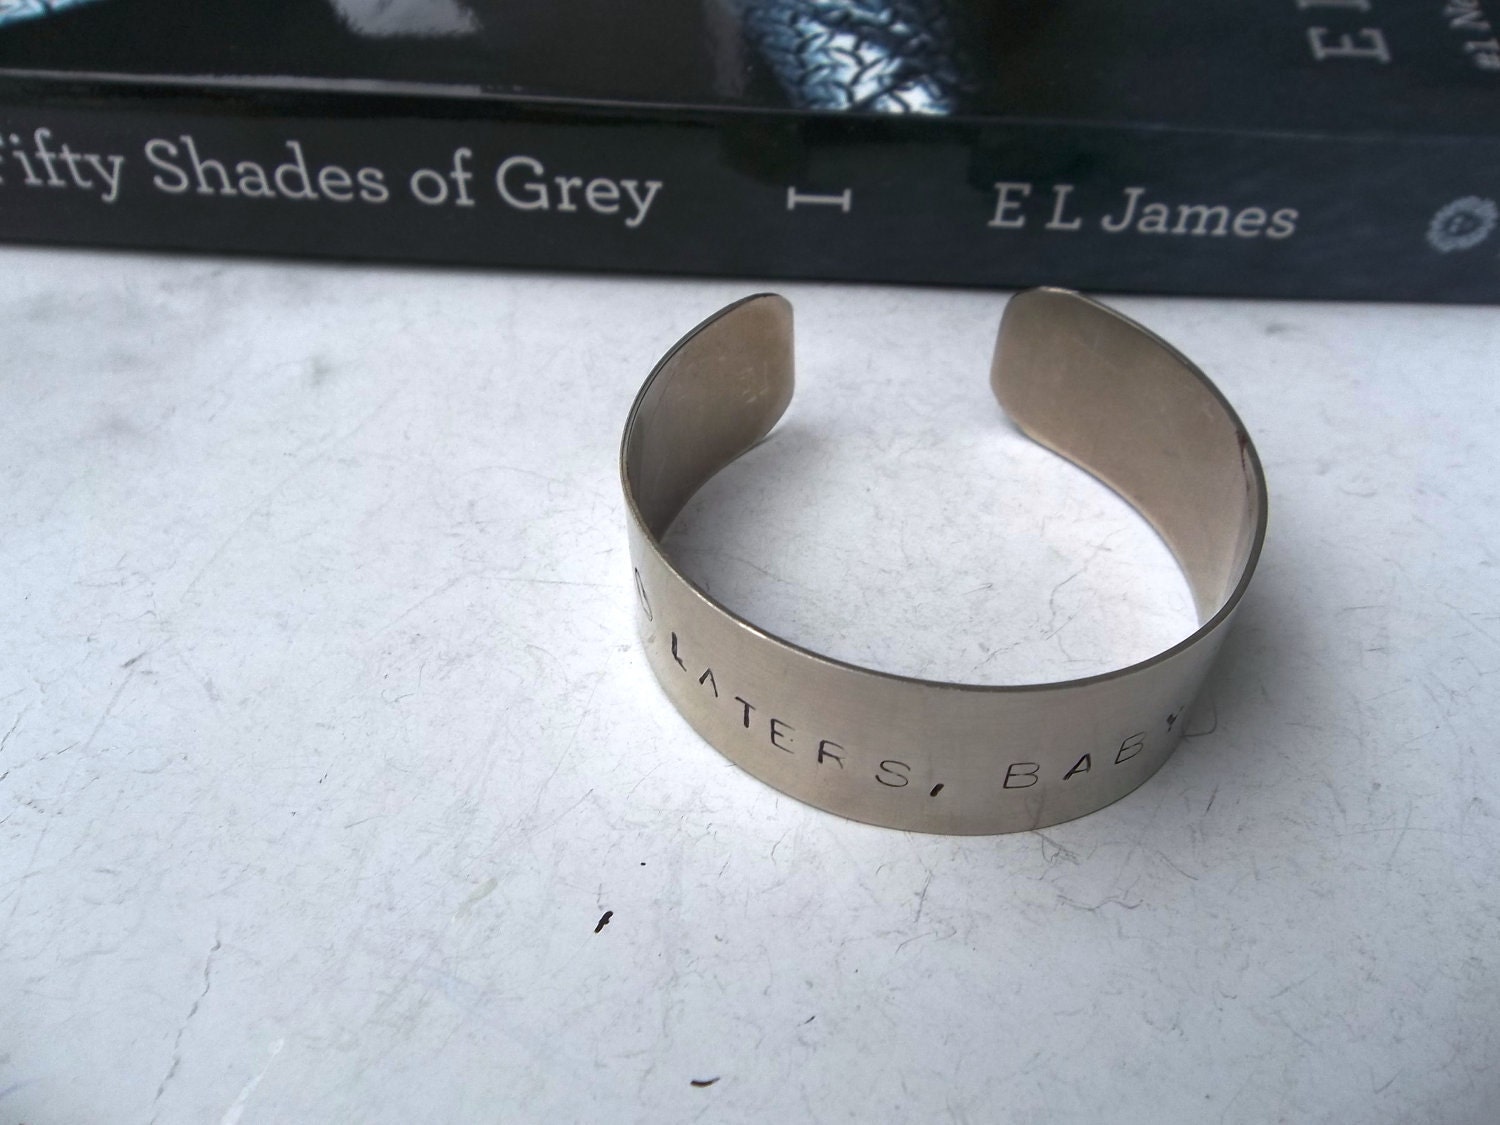 Fifty Shades Laters, Baby Silver Cuff Bracelet Hand Stamped Inspired by the Book 50 Shades